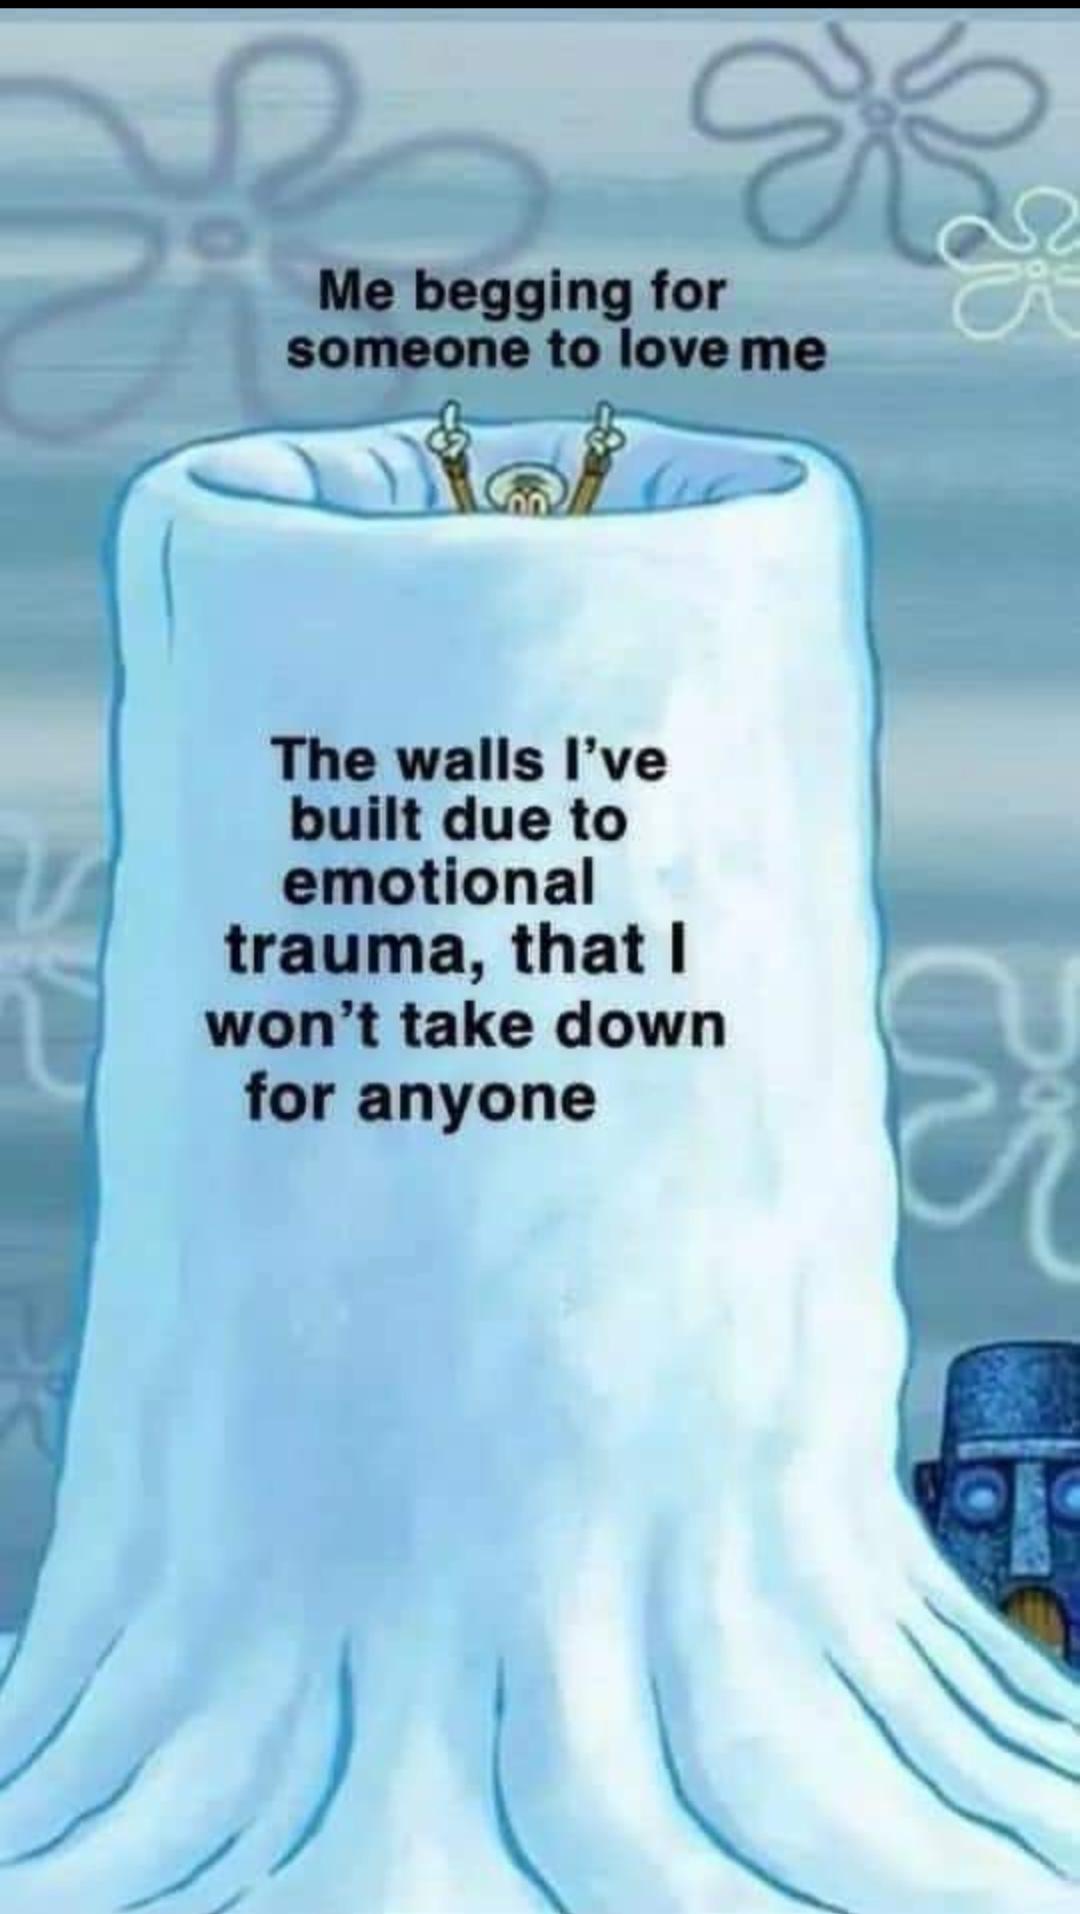 Spongebob, Yelp Spongebob Memes Spongebob, Yelp text: Me begging for someone to love me The walls I've built due to emotional trauma, that I won't take down for anyone 